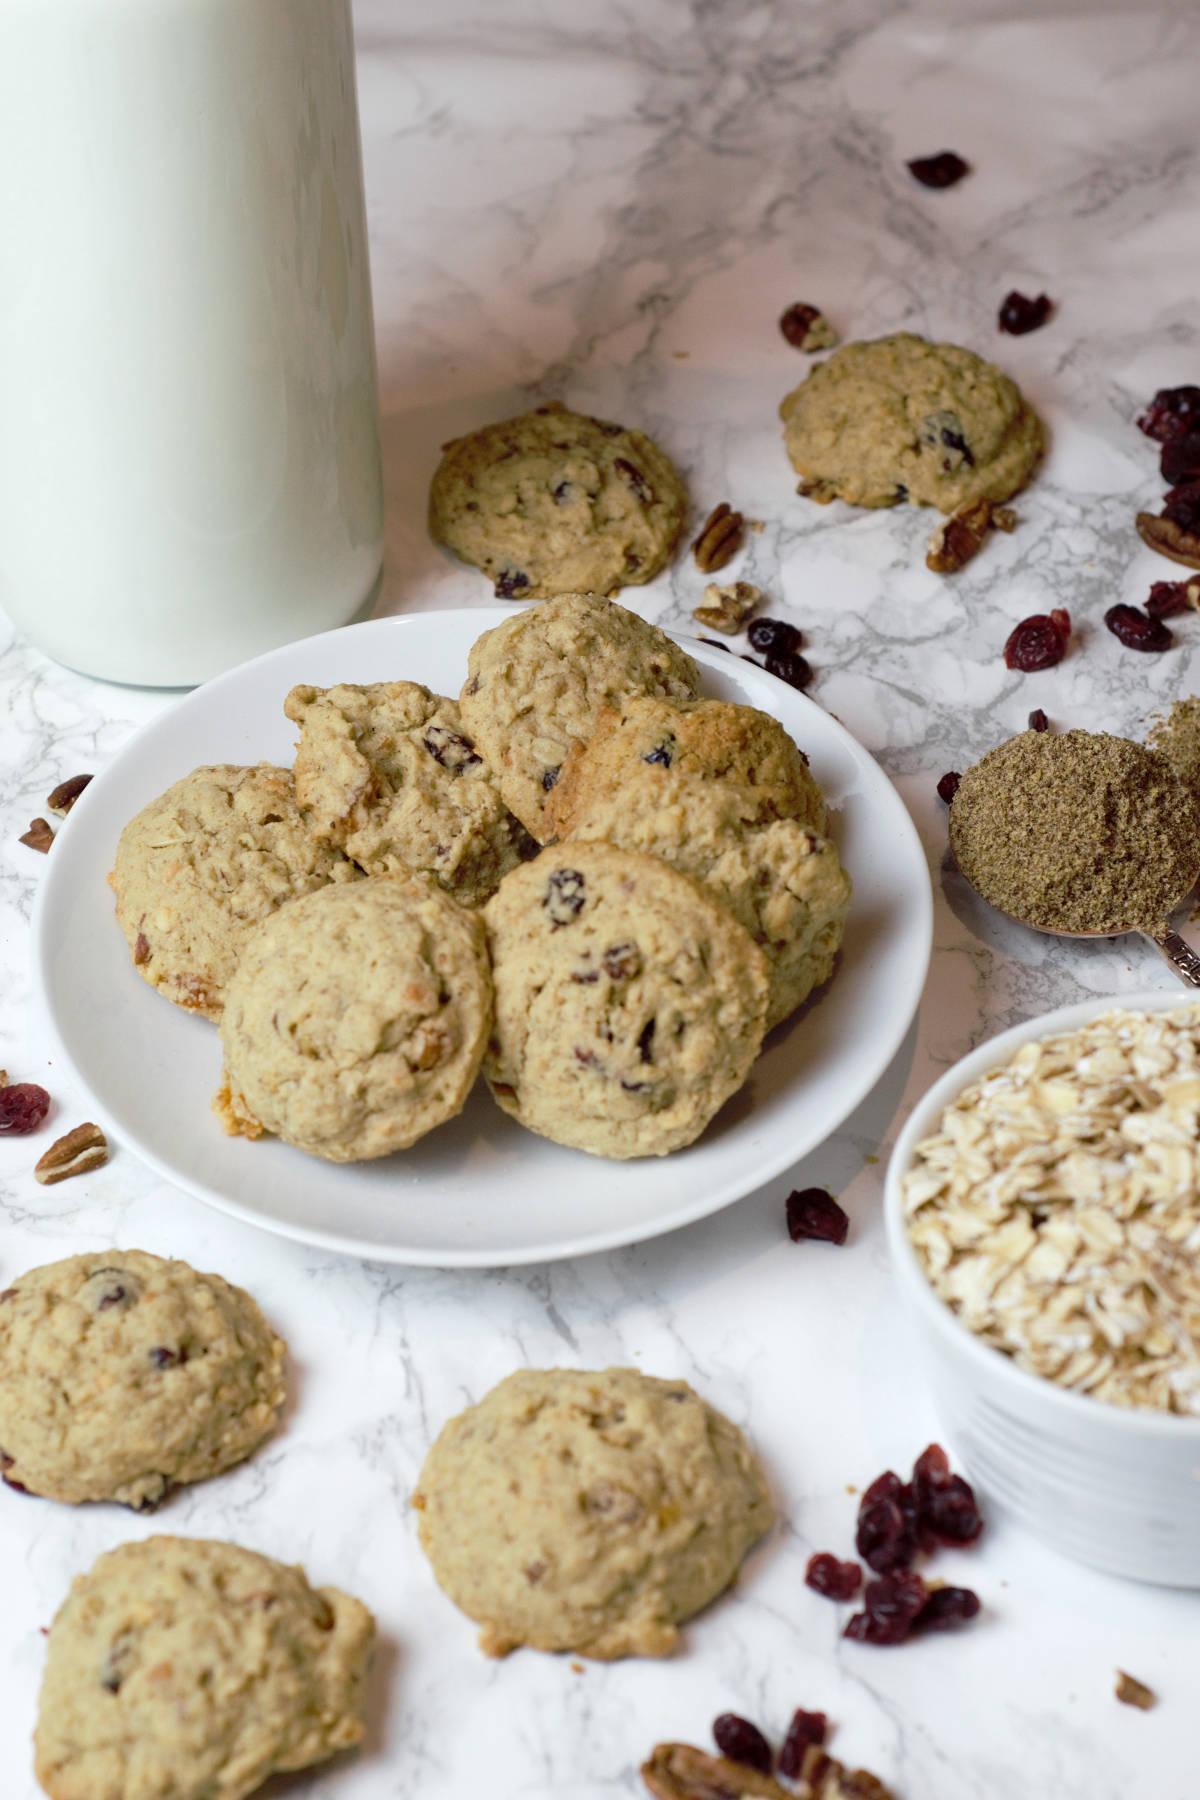 Plate of breakfast cookies with pitcher or milk, bowl of oats, and spoon of flax